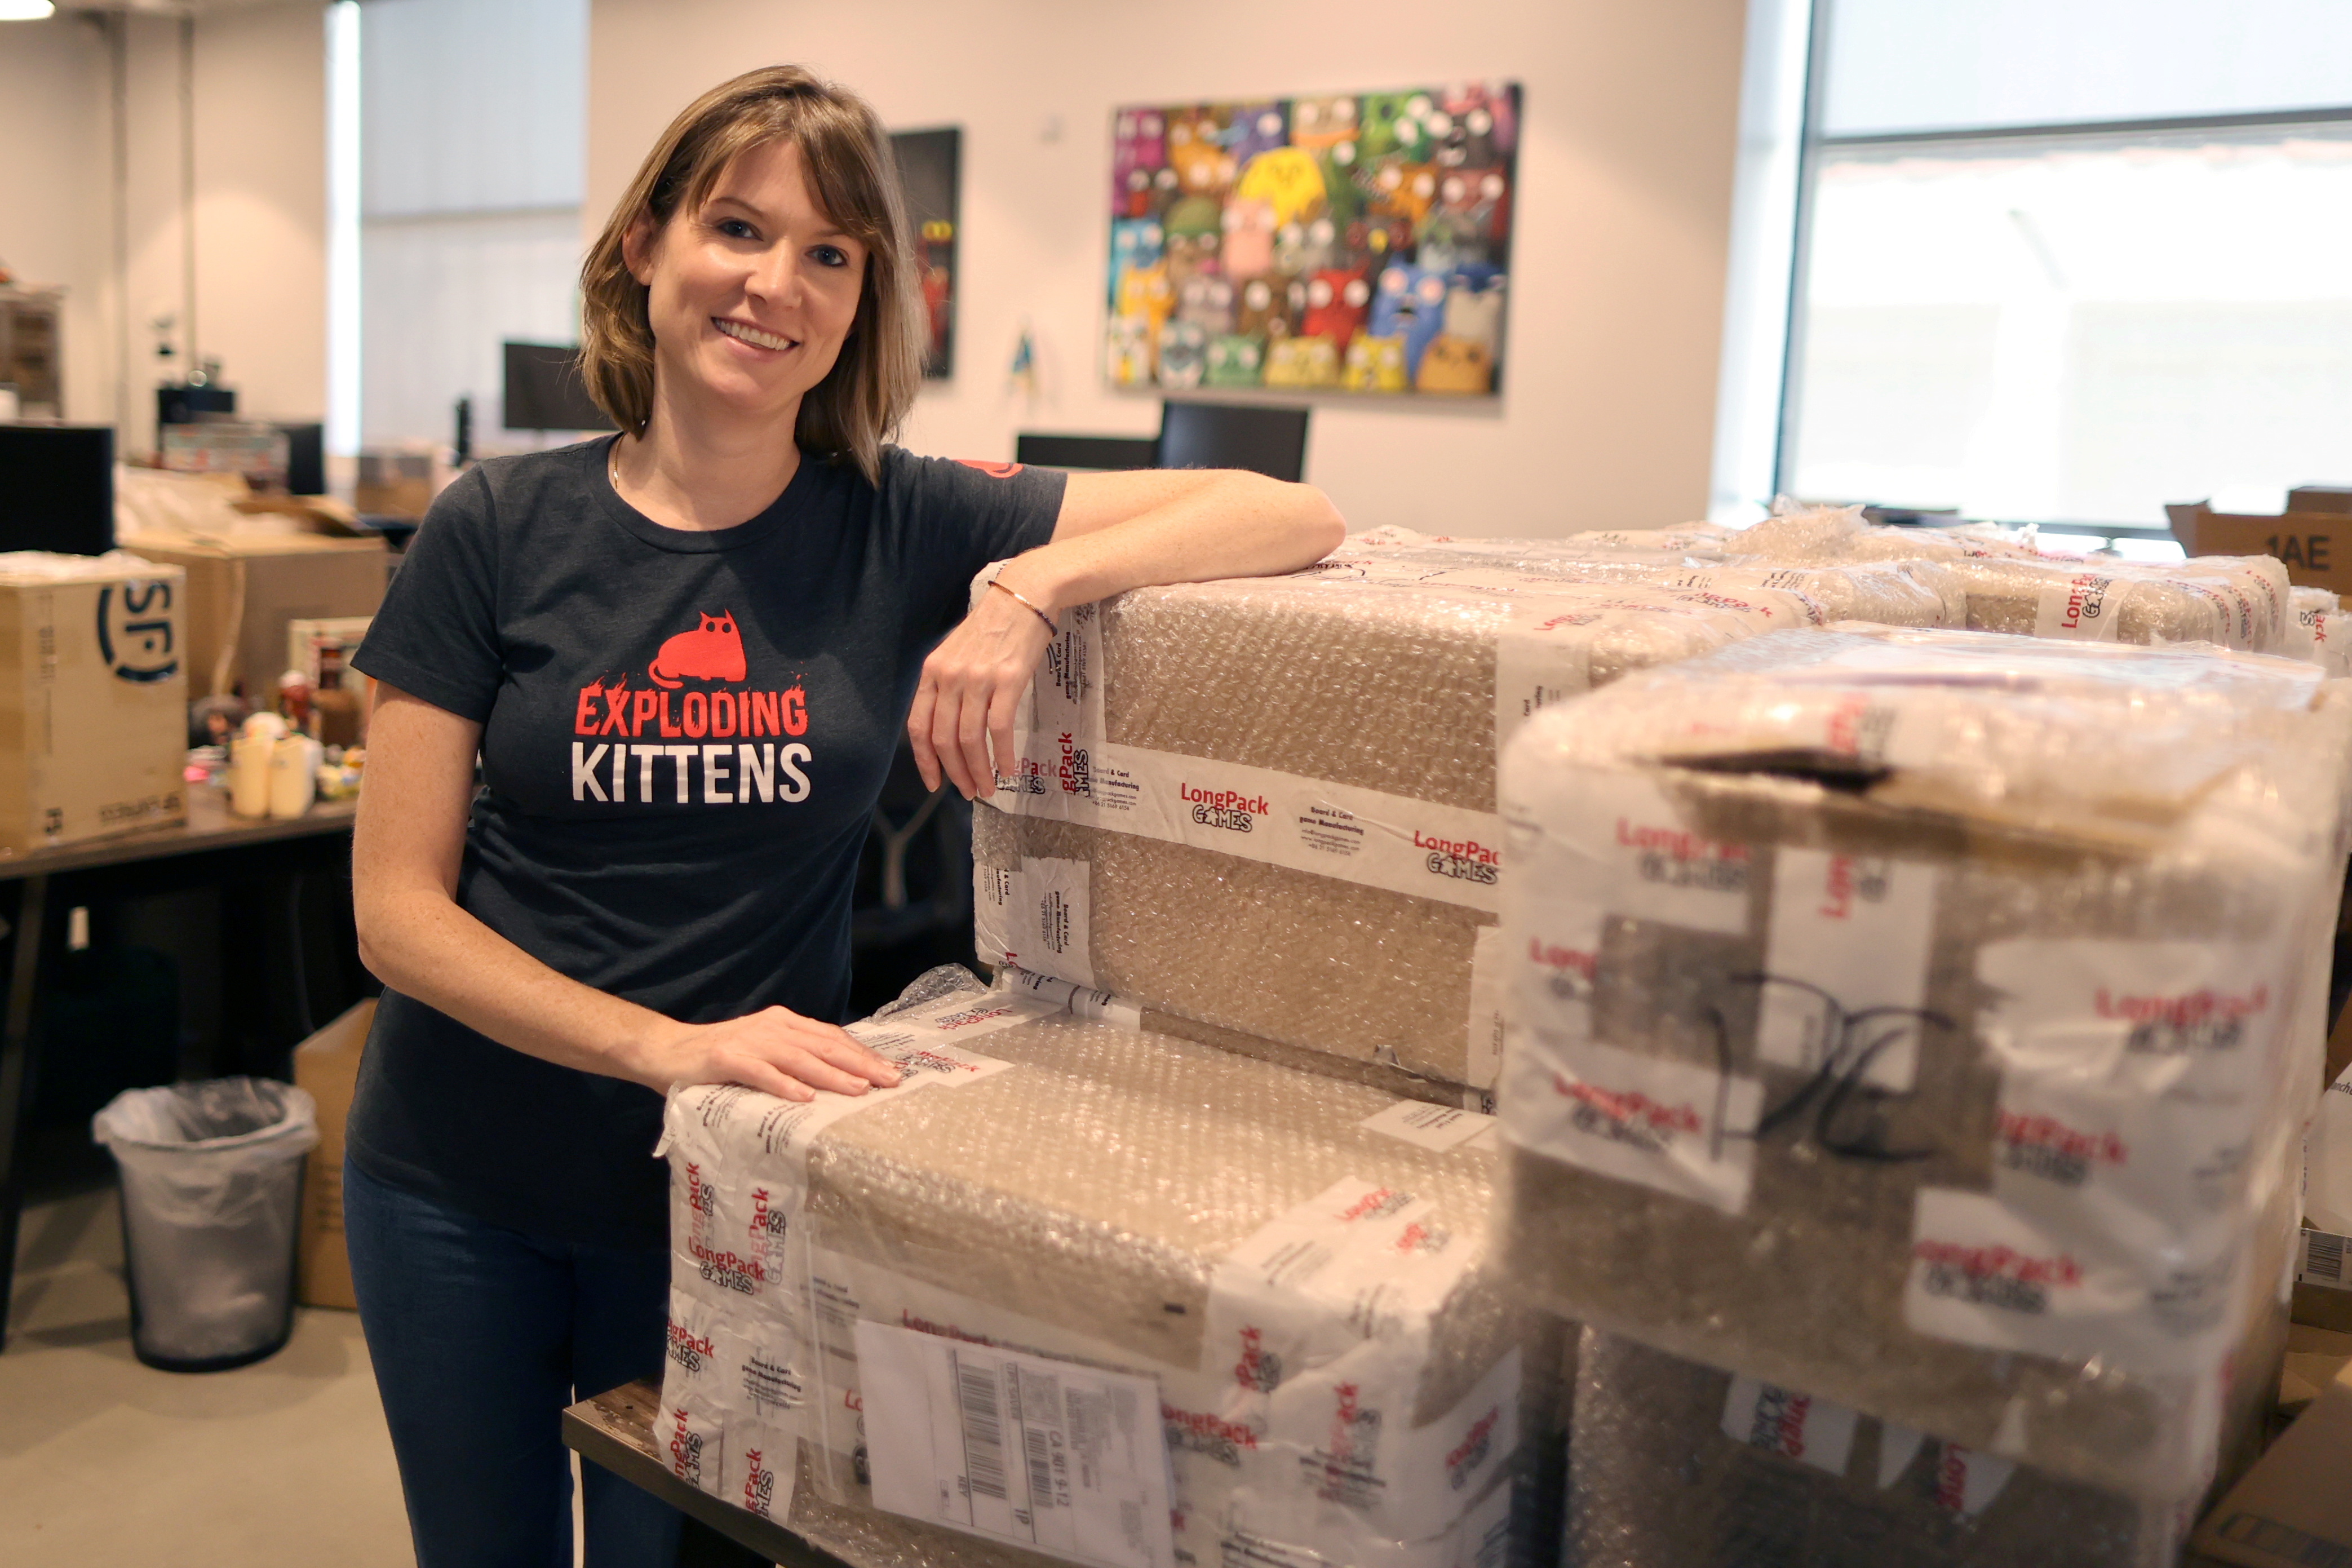 Carly McGinnis, Chief Operating Officer at Exploding Kittens, a Los Angeles-based board game company, poses for a photo at the company's office in Los Angeles